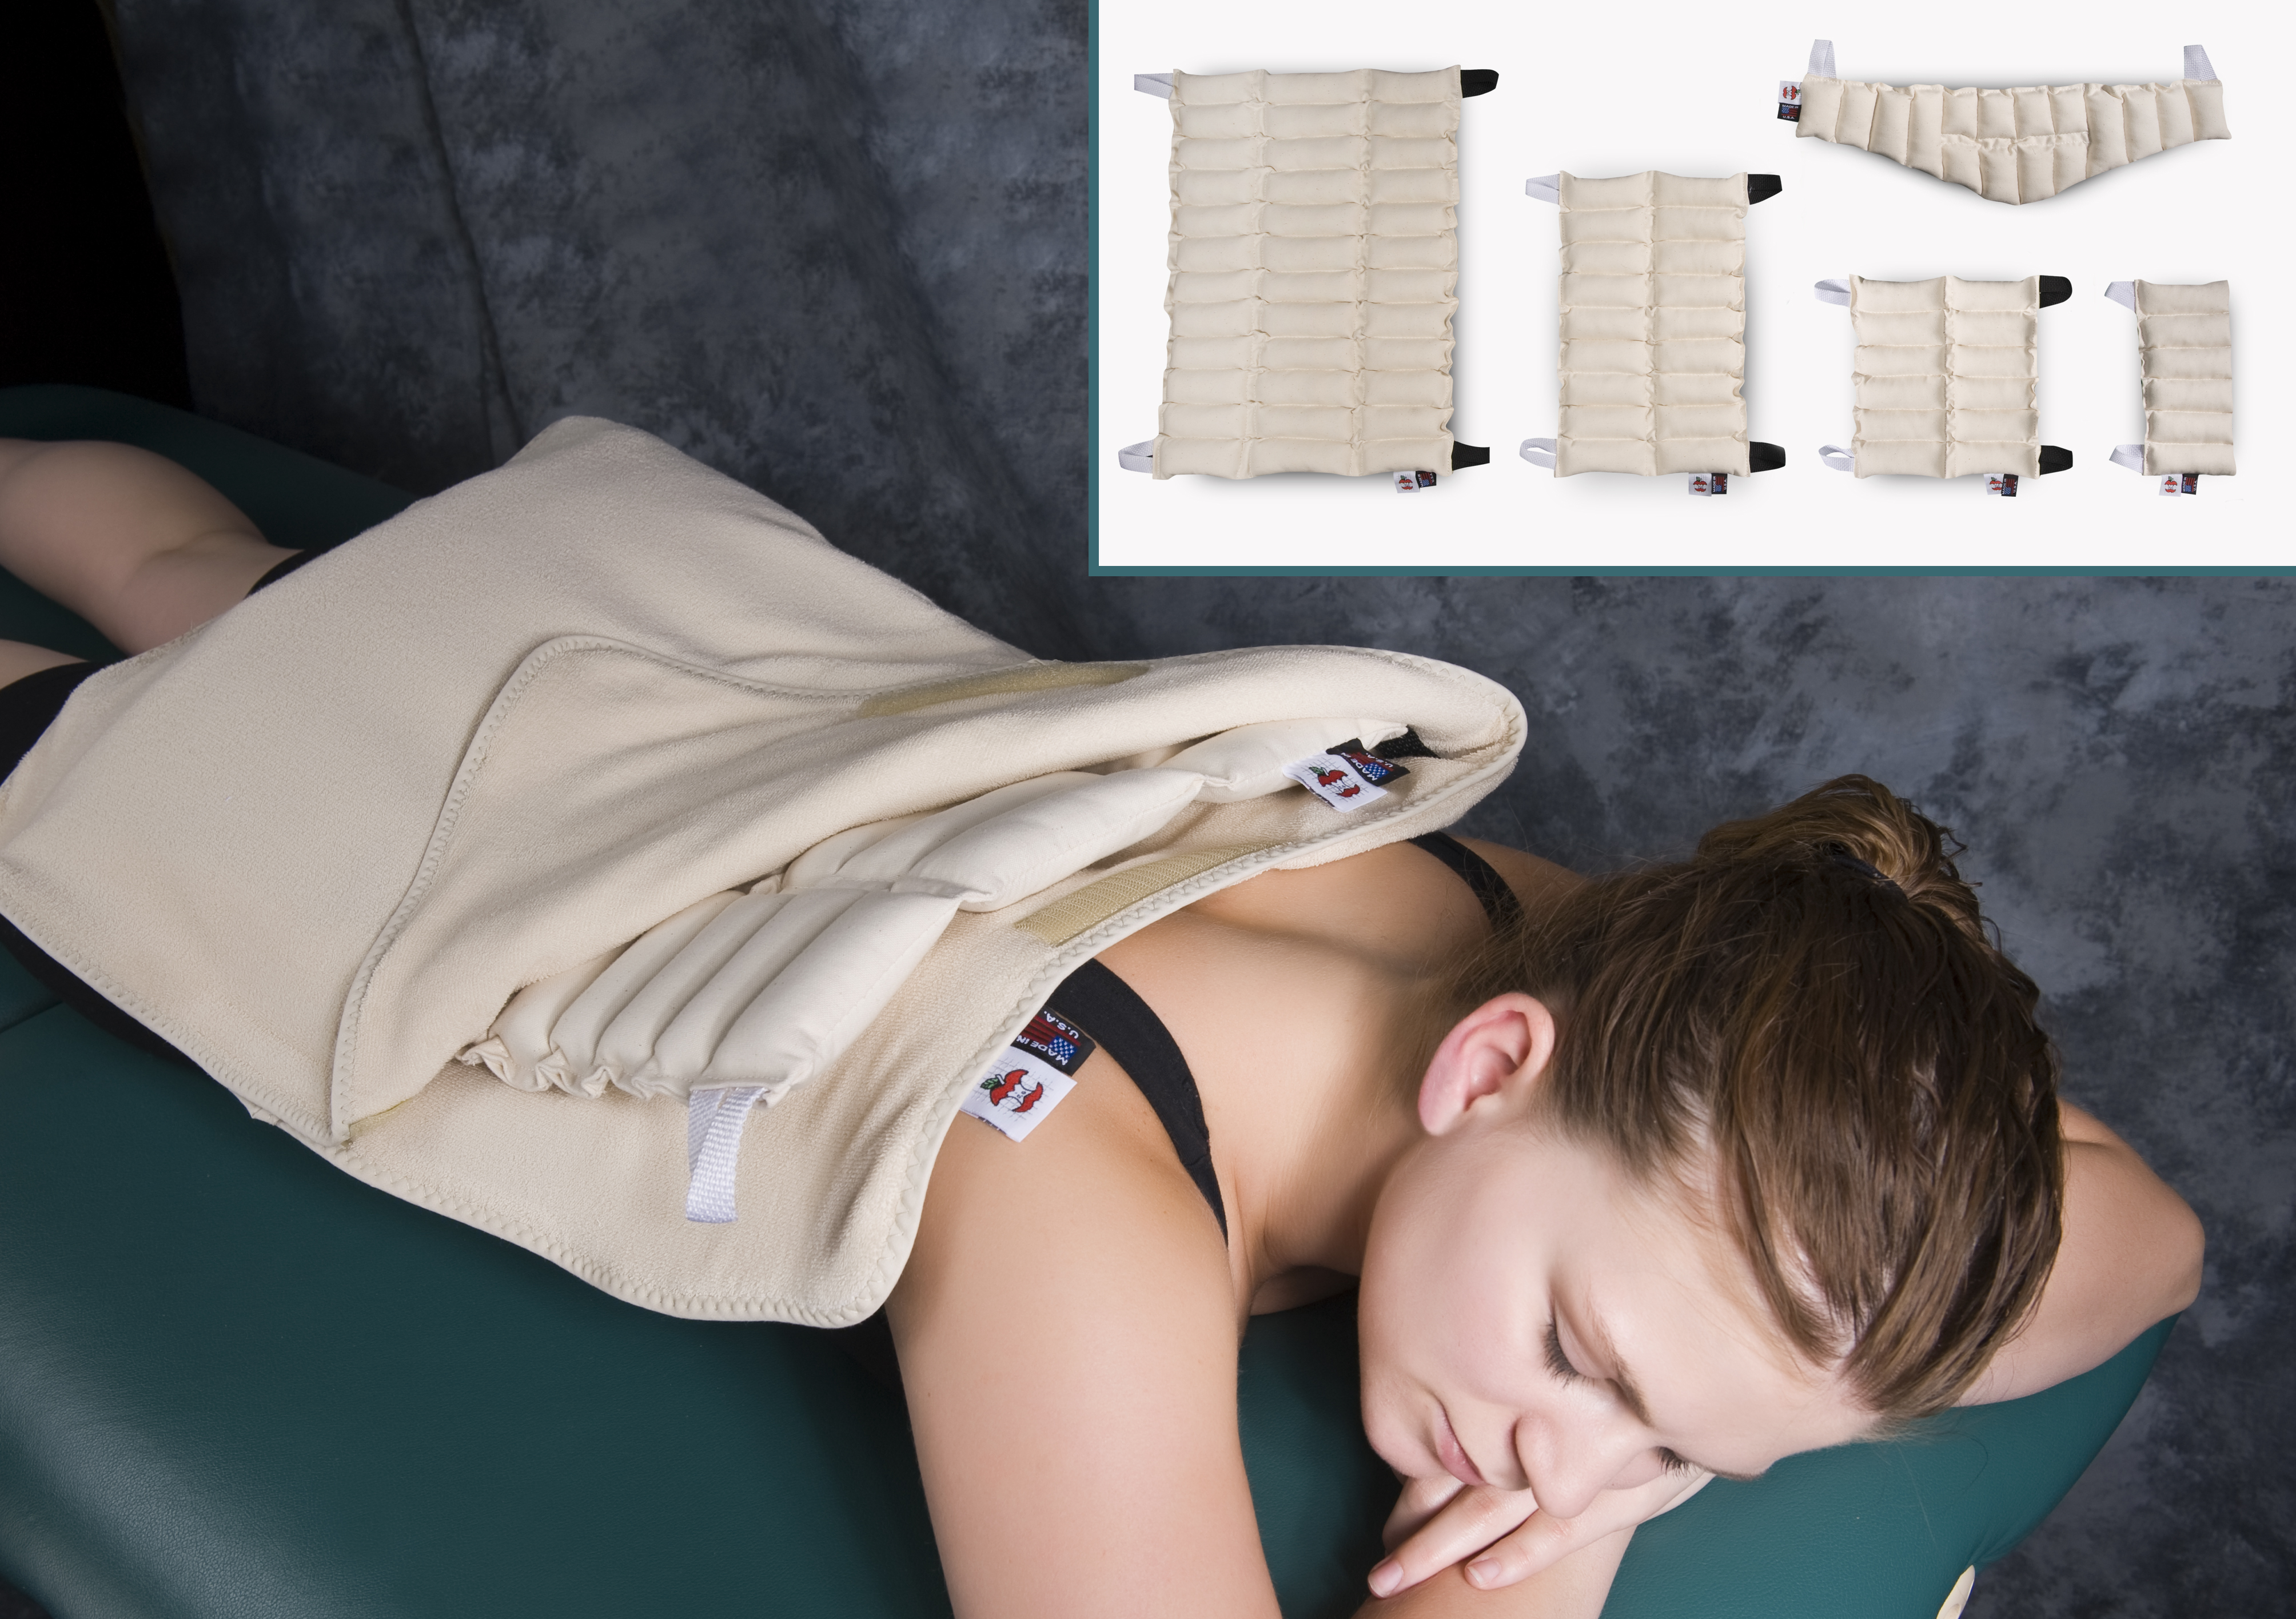 New ThermaCore Packs and Covers Provide Deep Penetrating, Moist Heat Therapy, MASSAGE Magazine